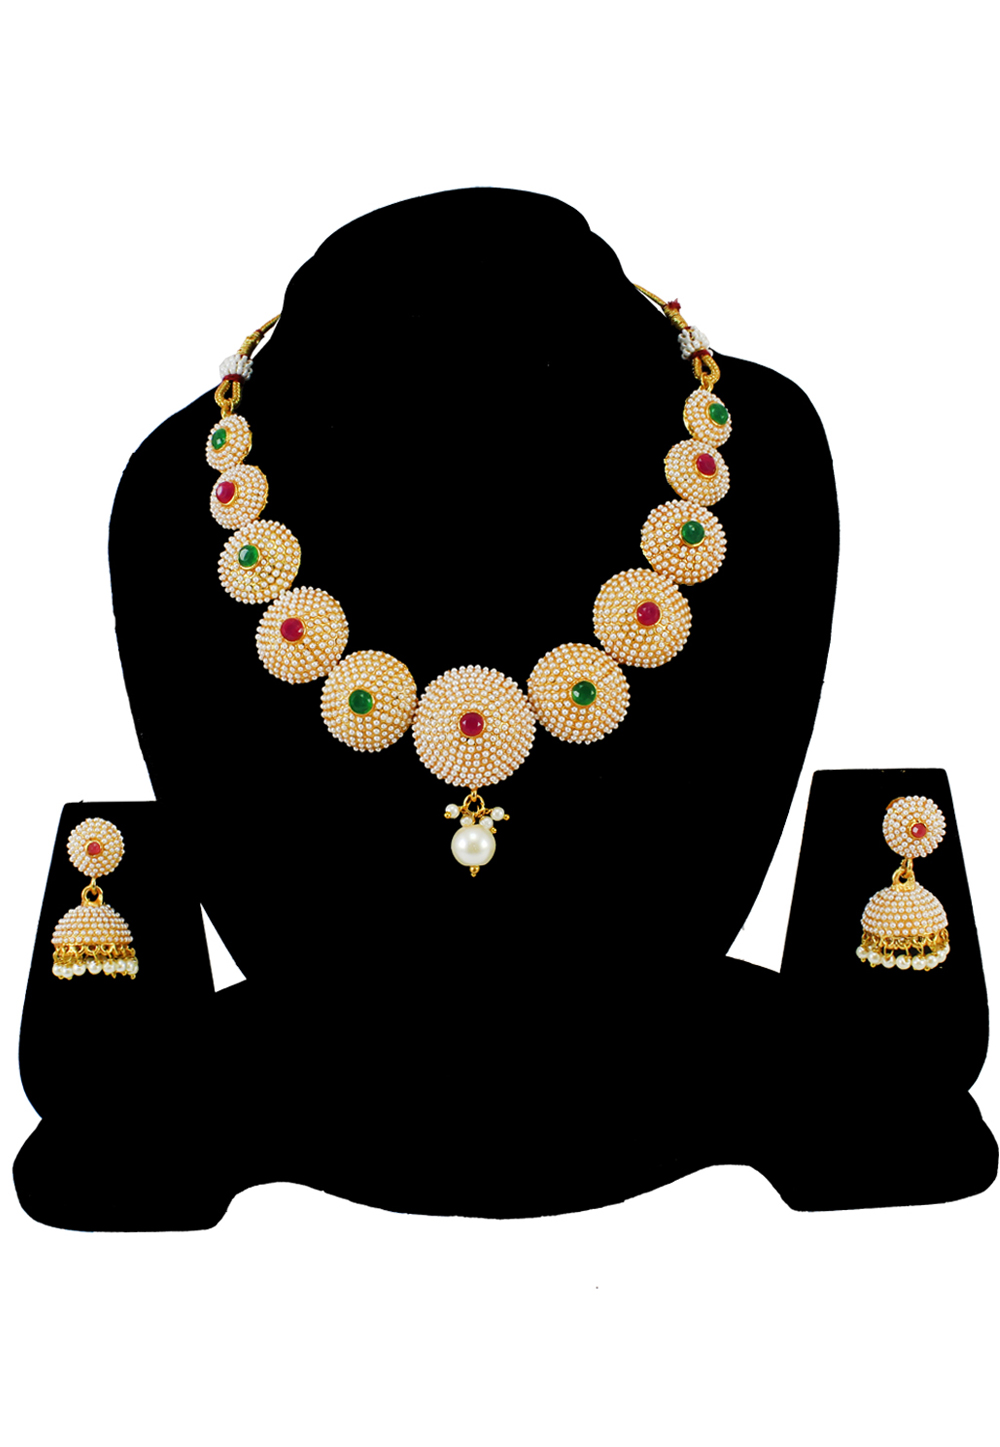 Green Alloy Pearl Beads Necklace Set Earrings 177821